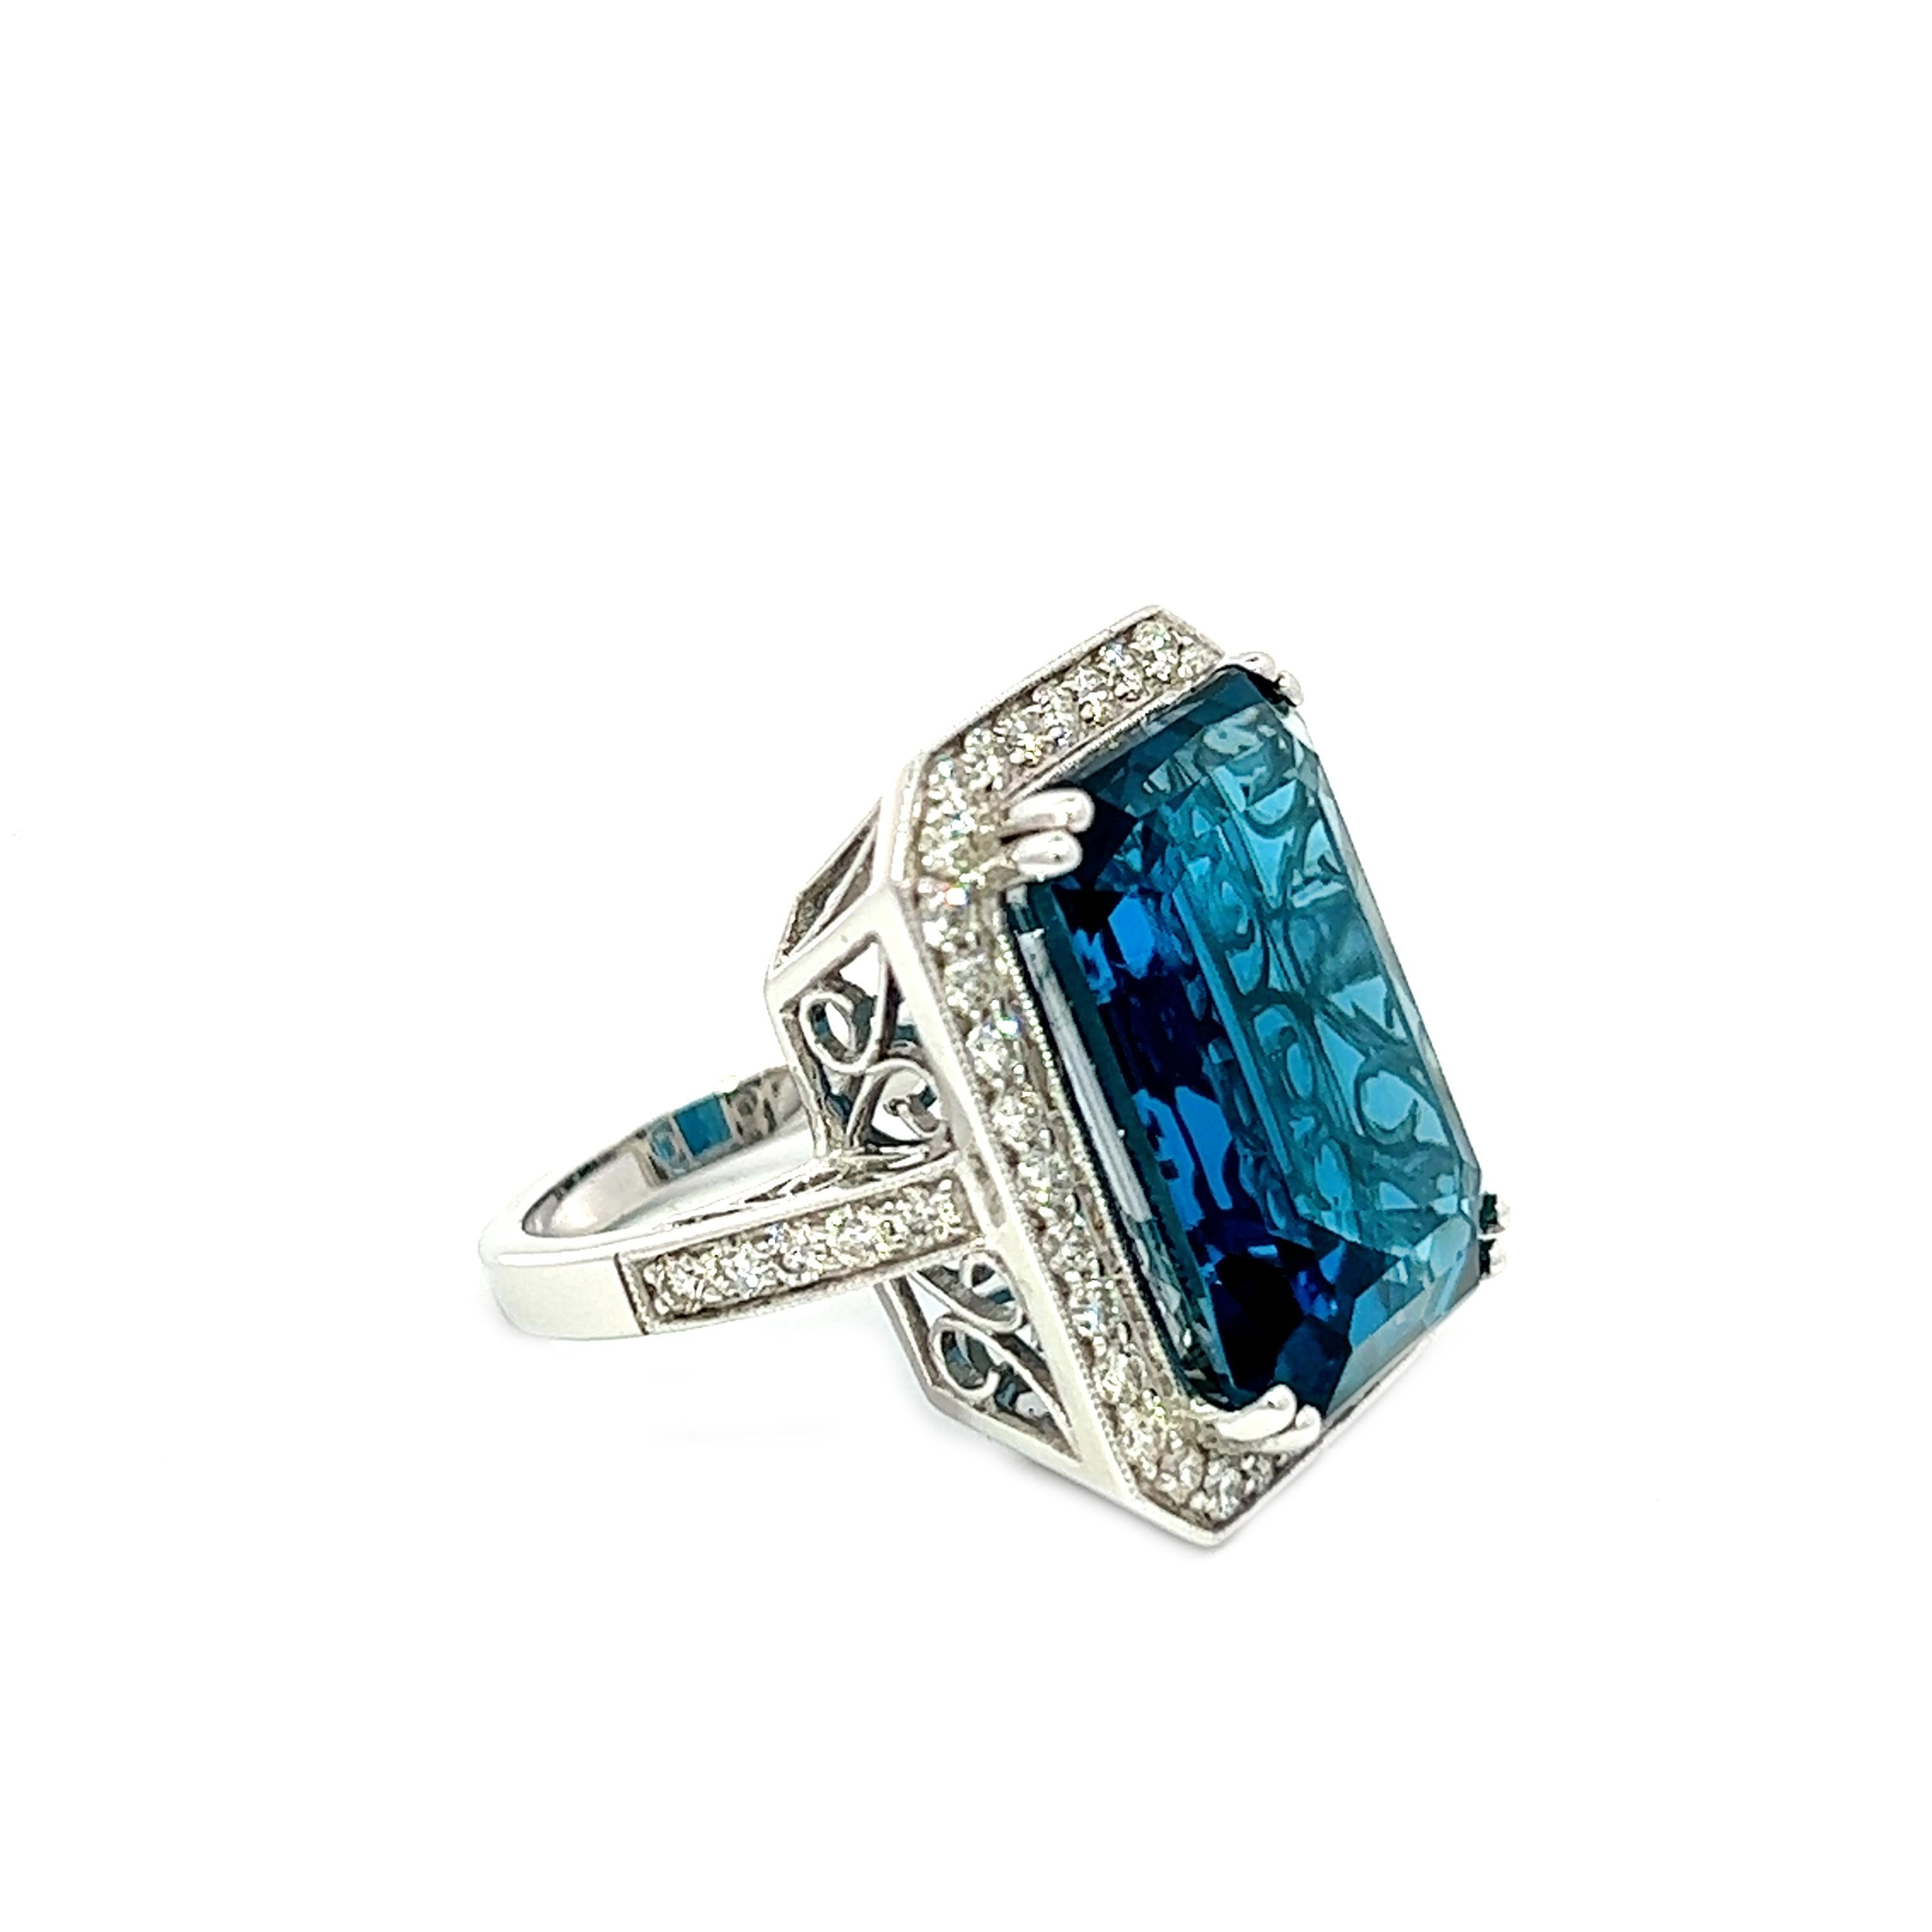 Aesthetic Movement 28.17CT Total Weight London Blue Topaz & Diamonds Ring, set in 14KW For Sale